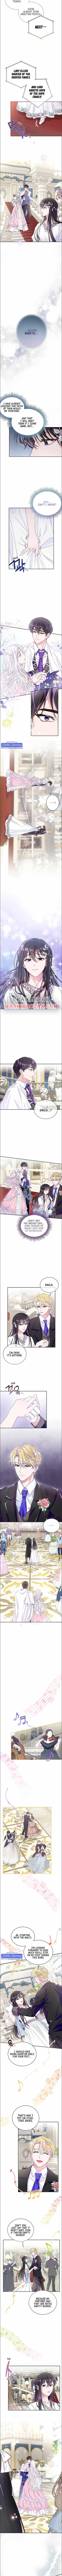 The Bad Ending Of The Otome Game - Page 3